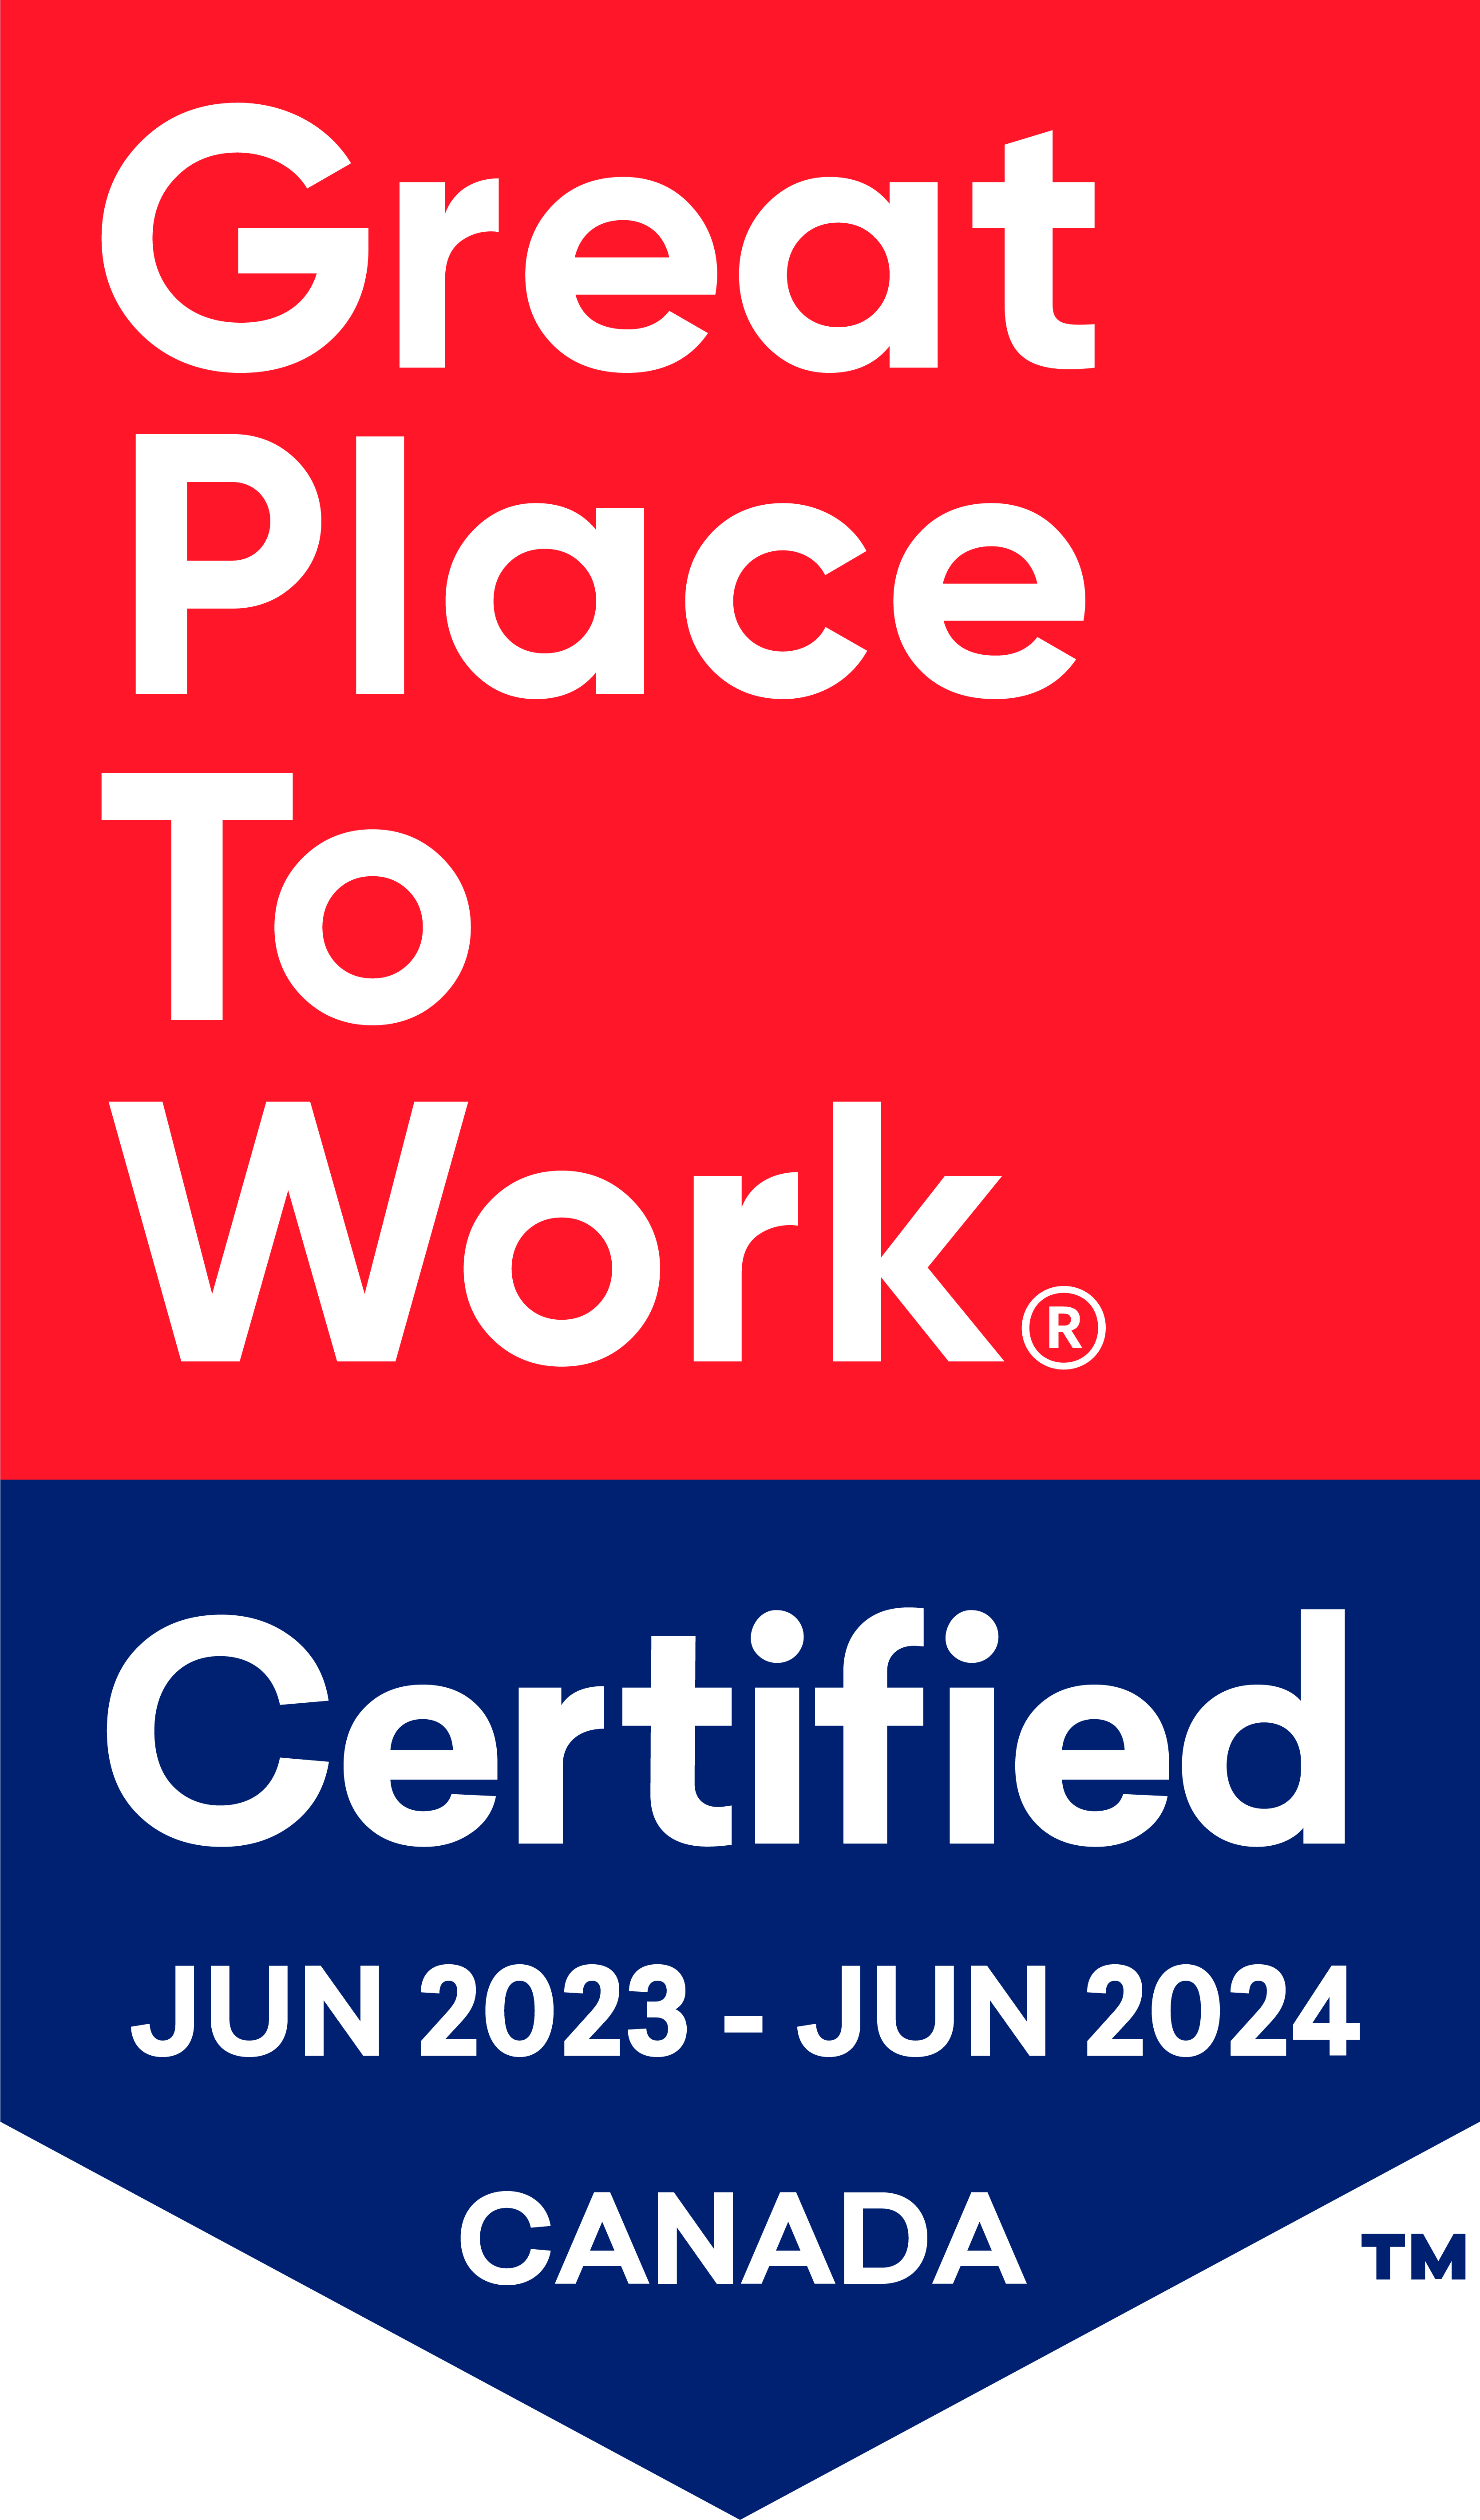 Great Place to Work Certification logo